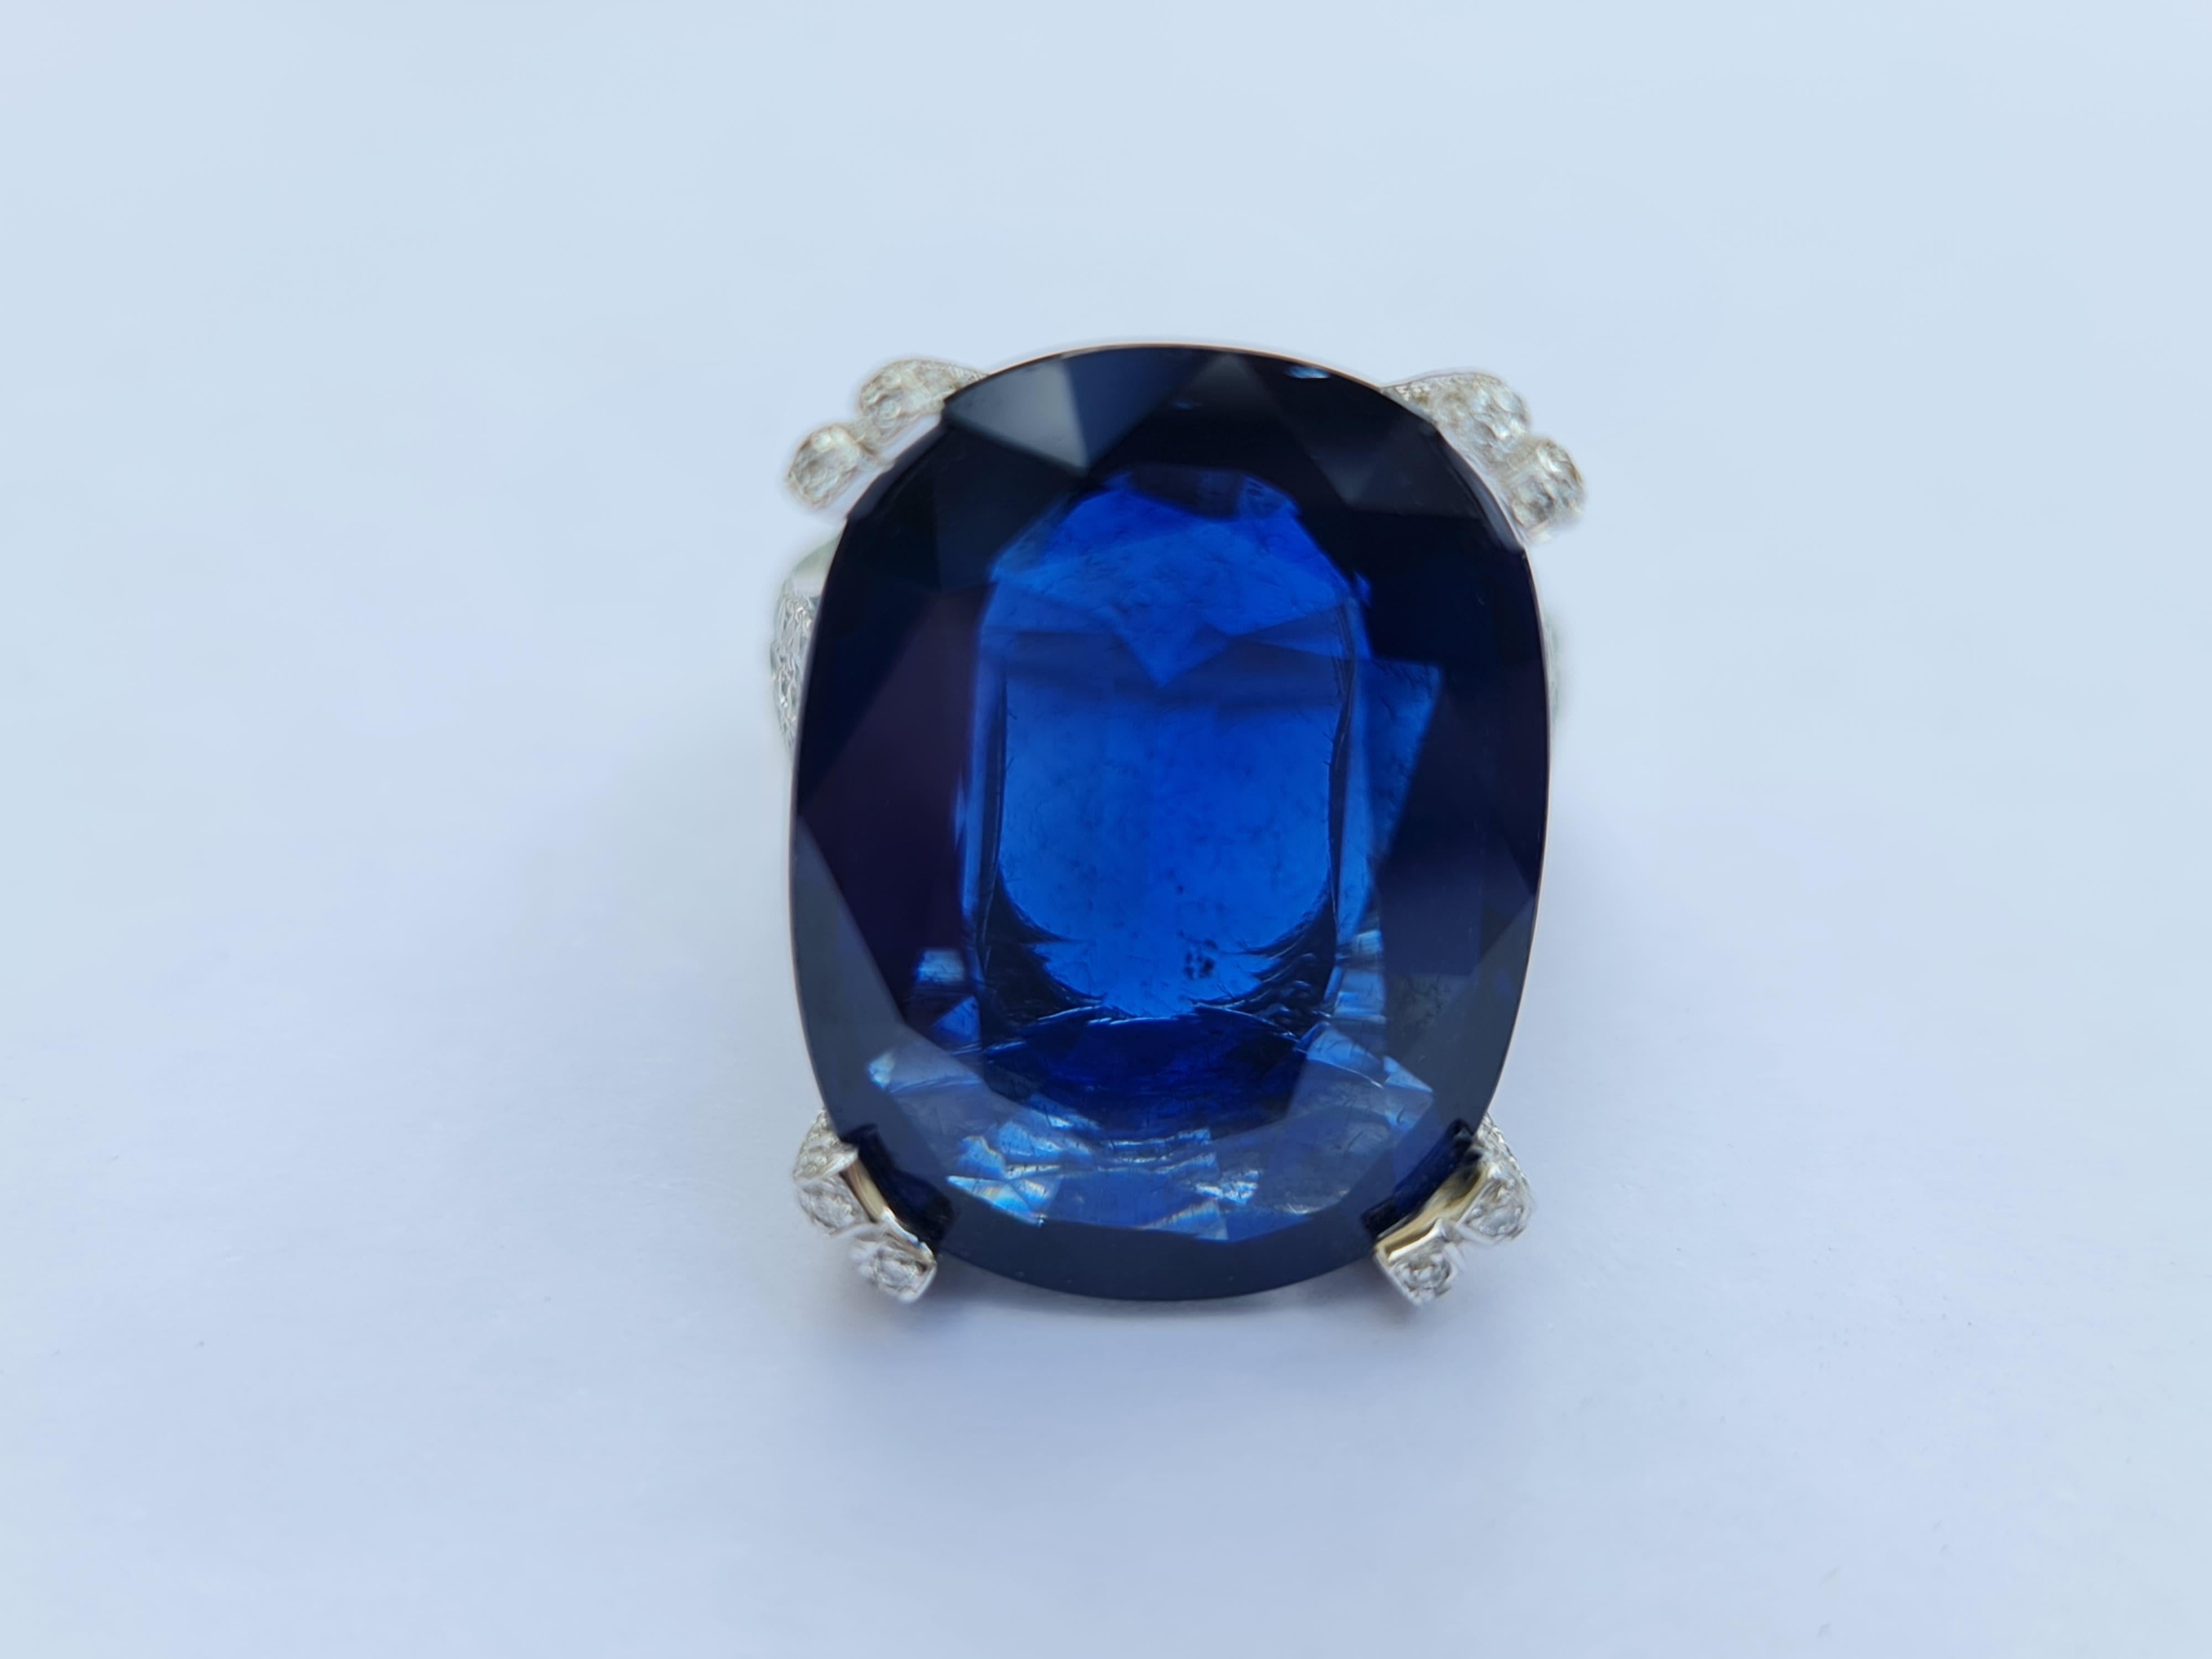 This design features 2.13 carat of VS white untreated natural diamonds, the perfect contrast to the translucent blue of this 22.22 carat natural blue Sapphire statement ring. The smooth white gold band offers a beautifully balanced texture to this